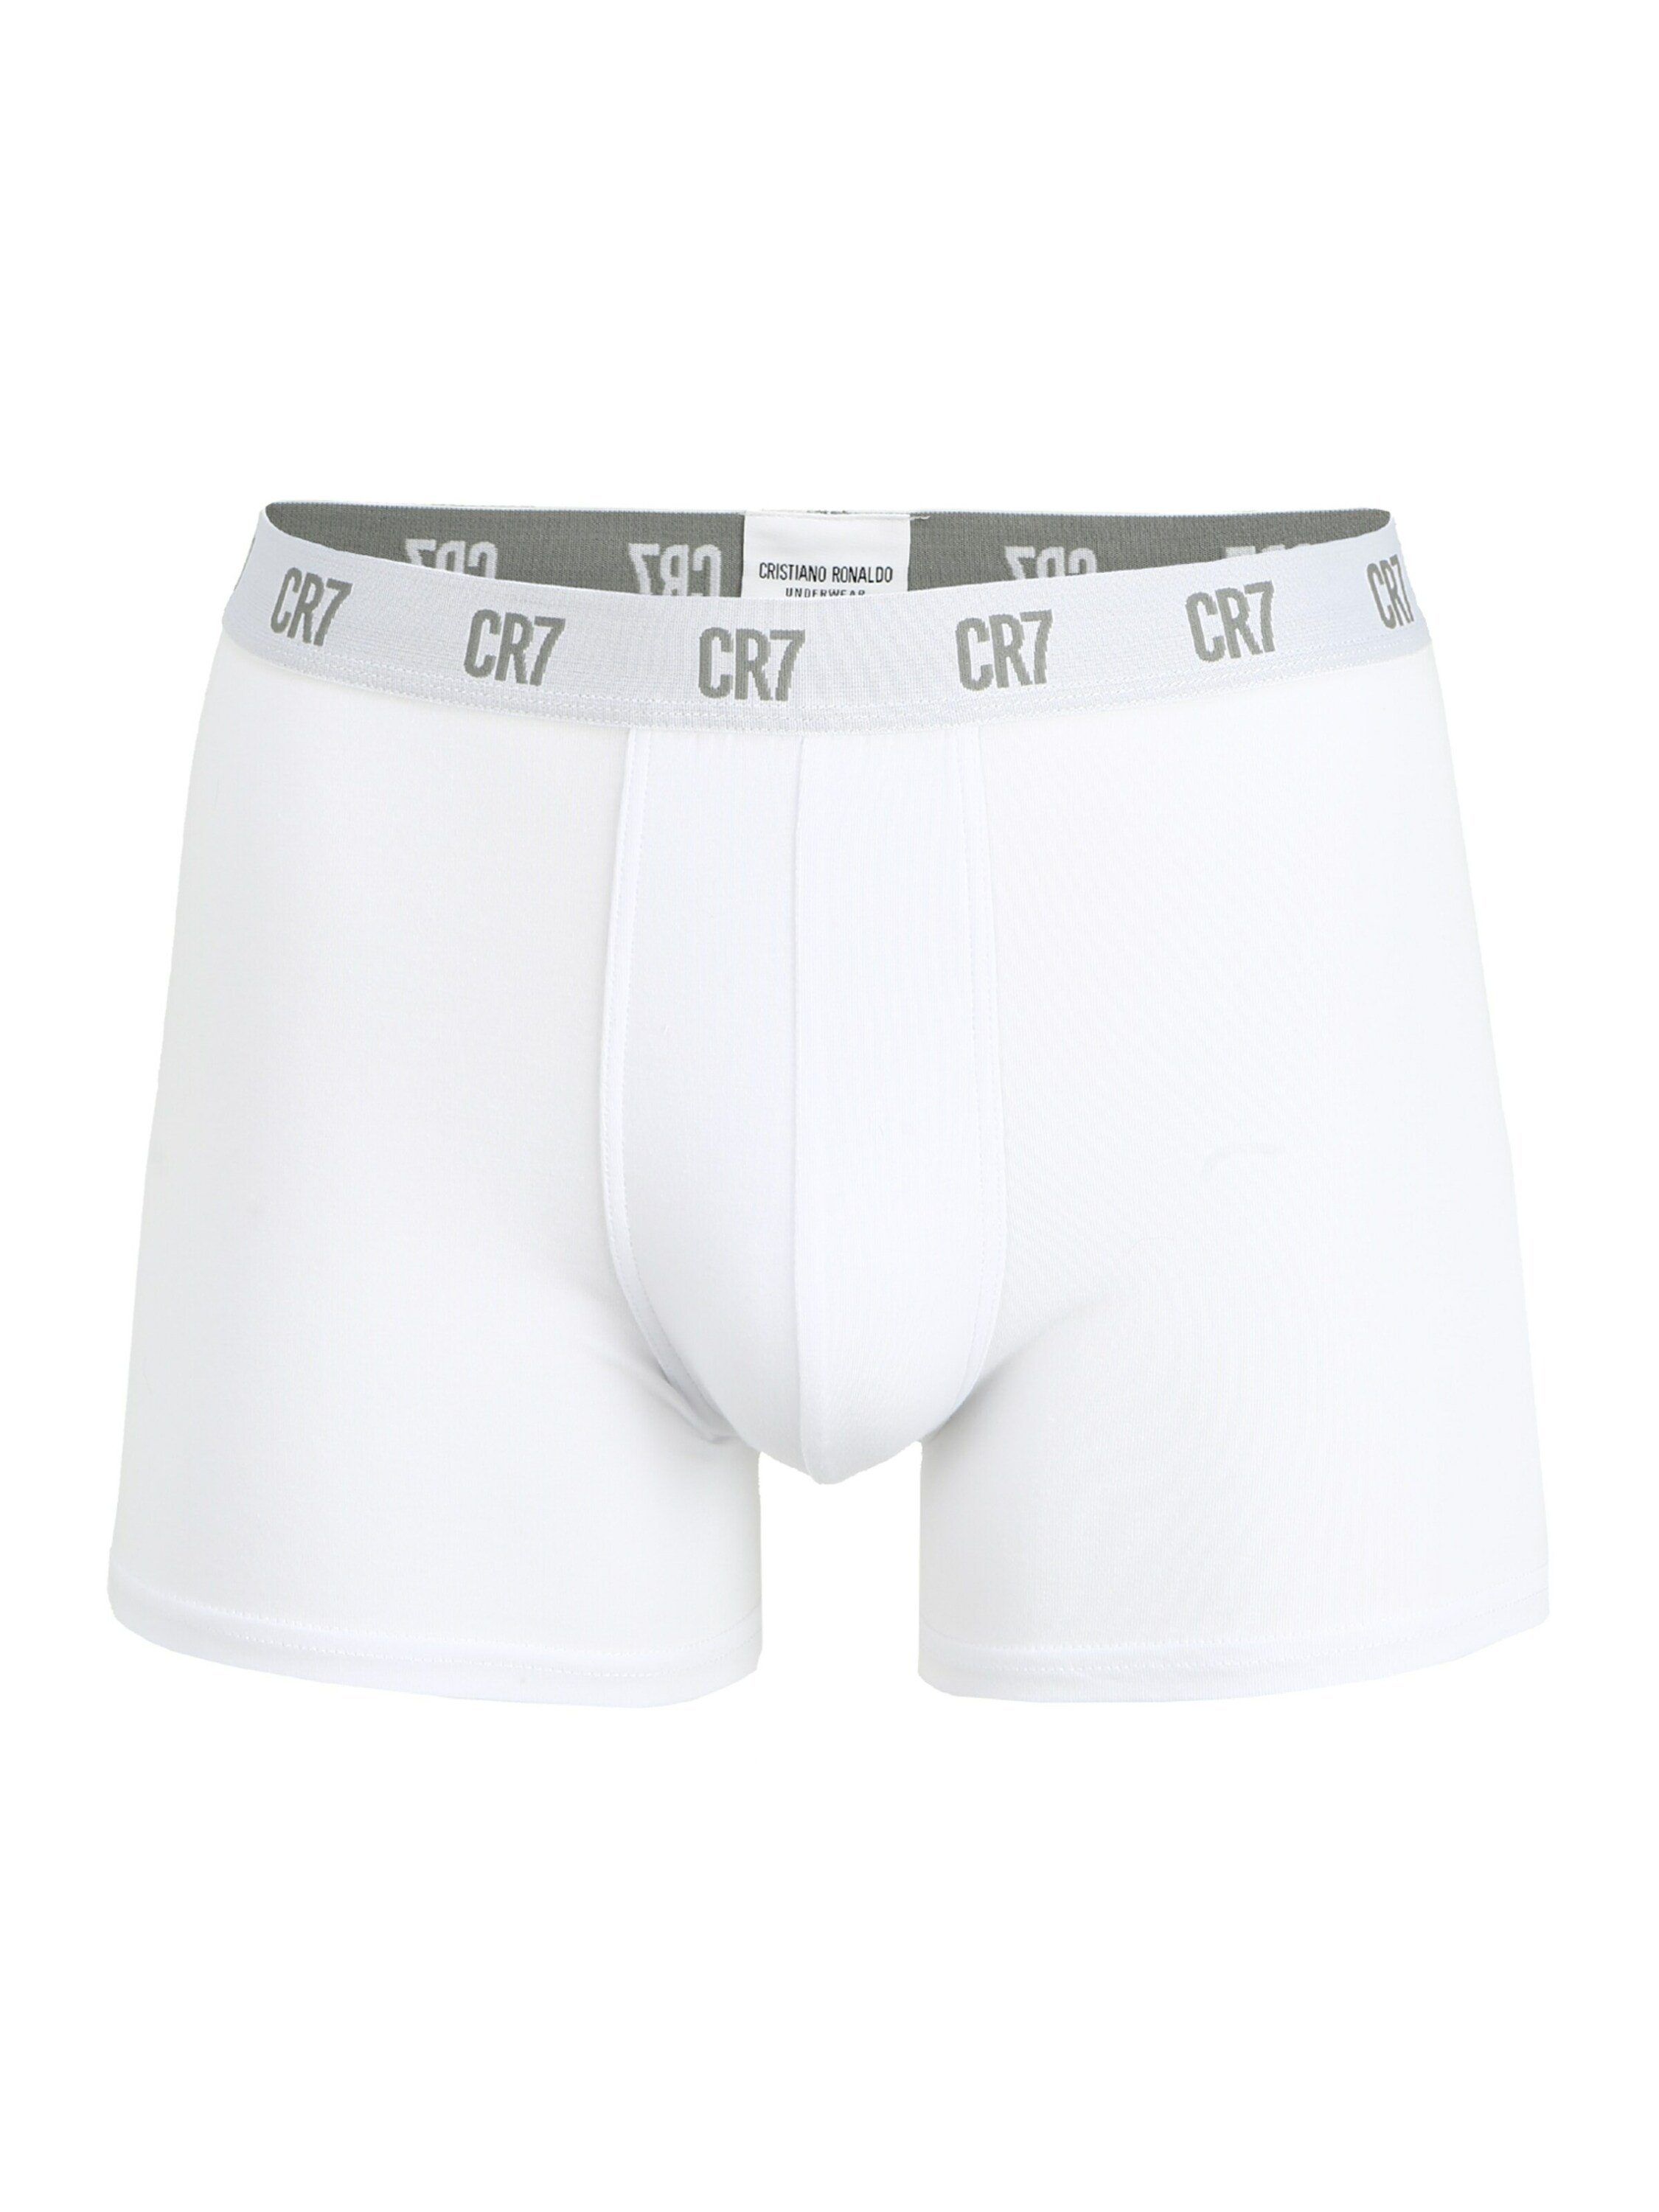 CR7 Boxershorts (3-St) weissweiss | Boxershorts